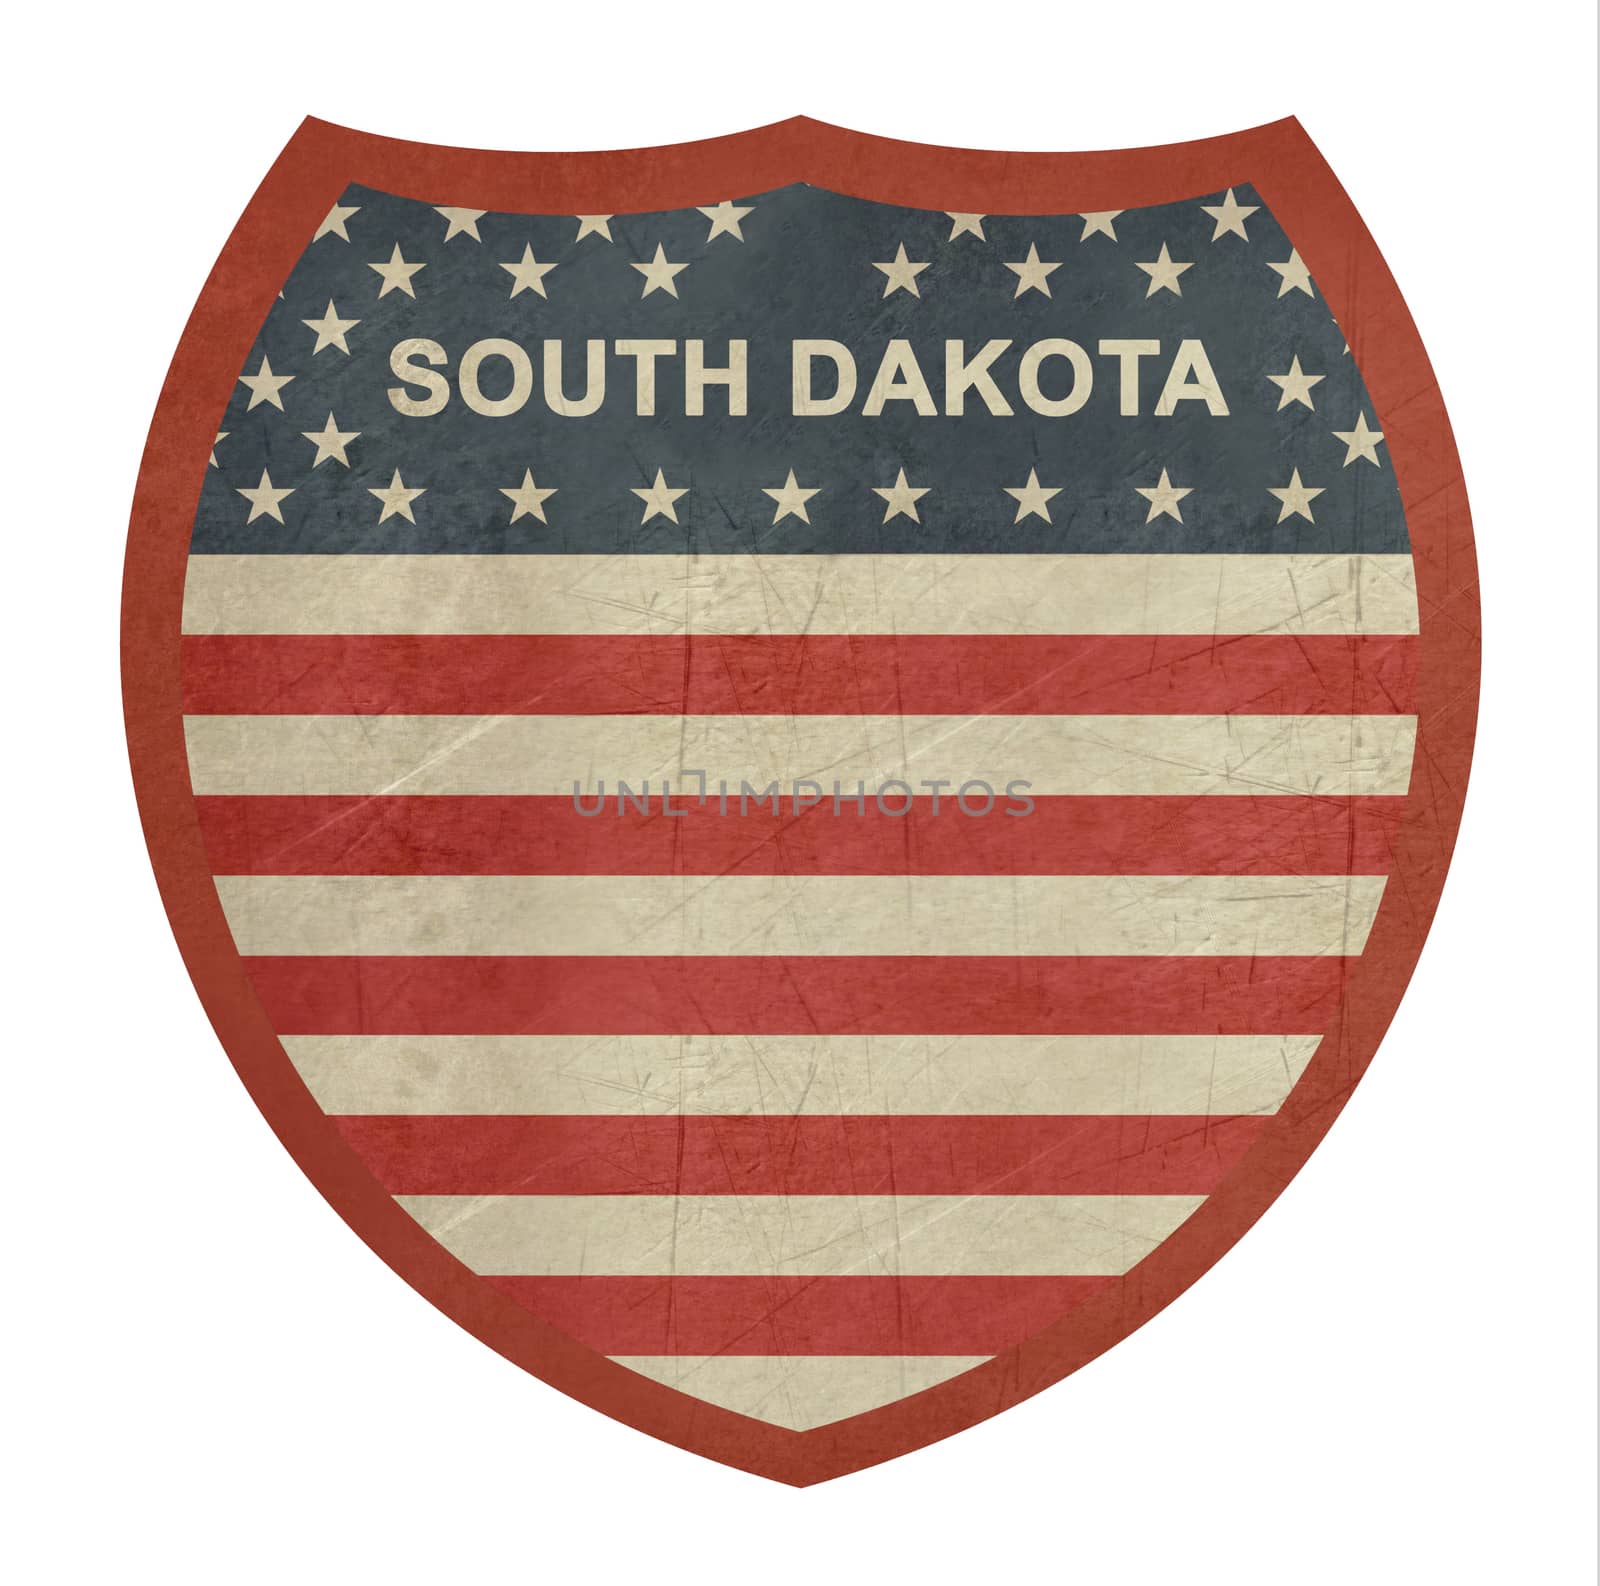 Grunge South Dakota American interstate highway sign isolated on a white background.